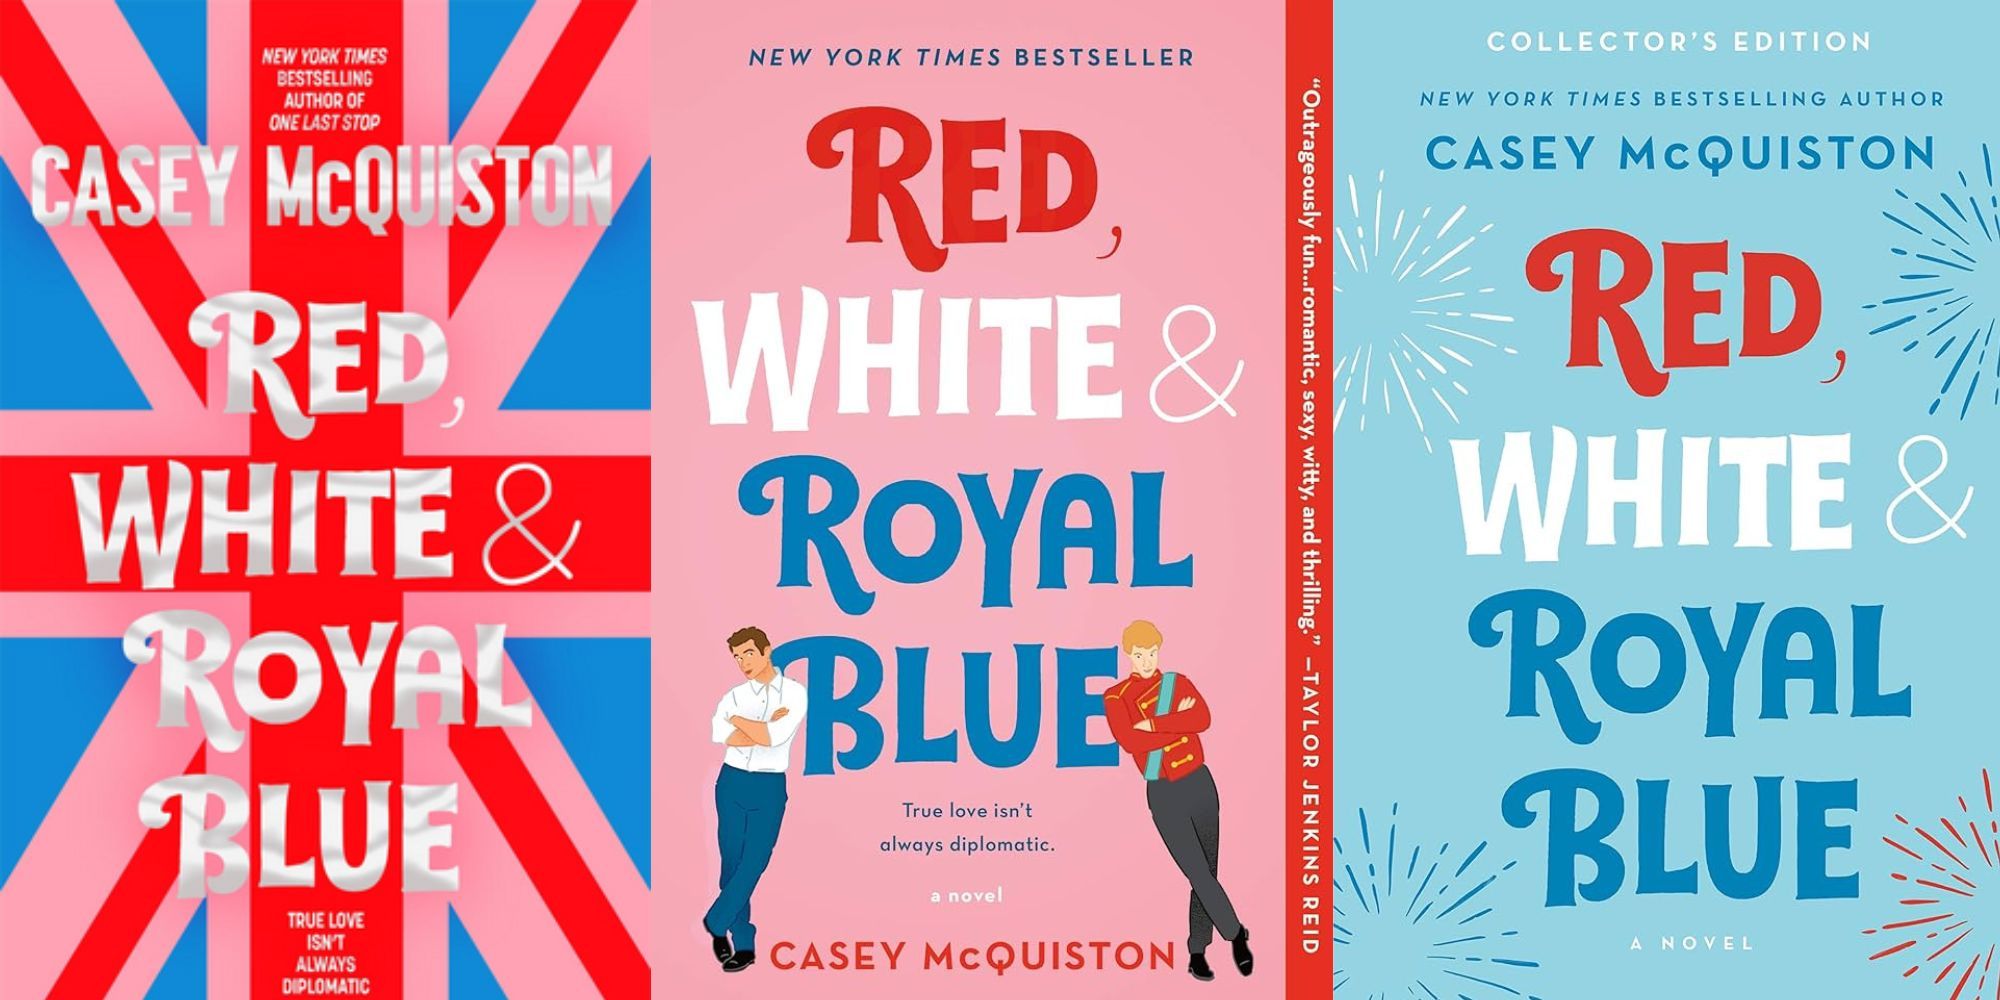 Different Red White & Royal Blue book covers